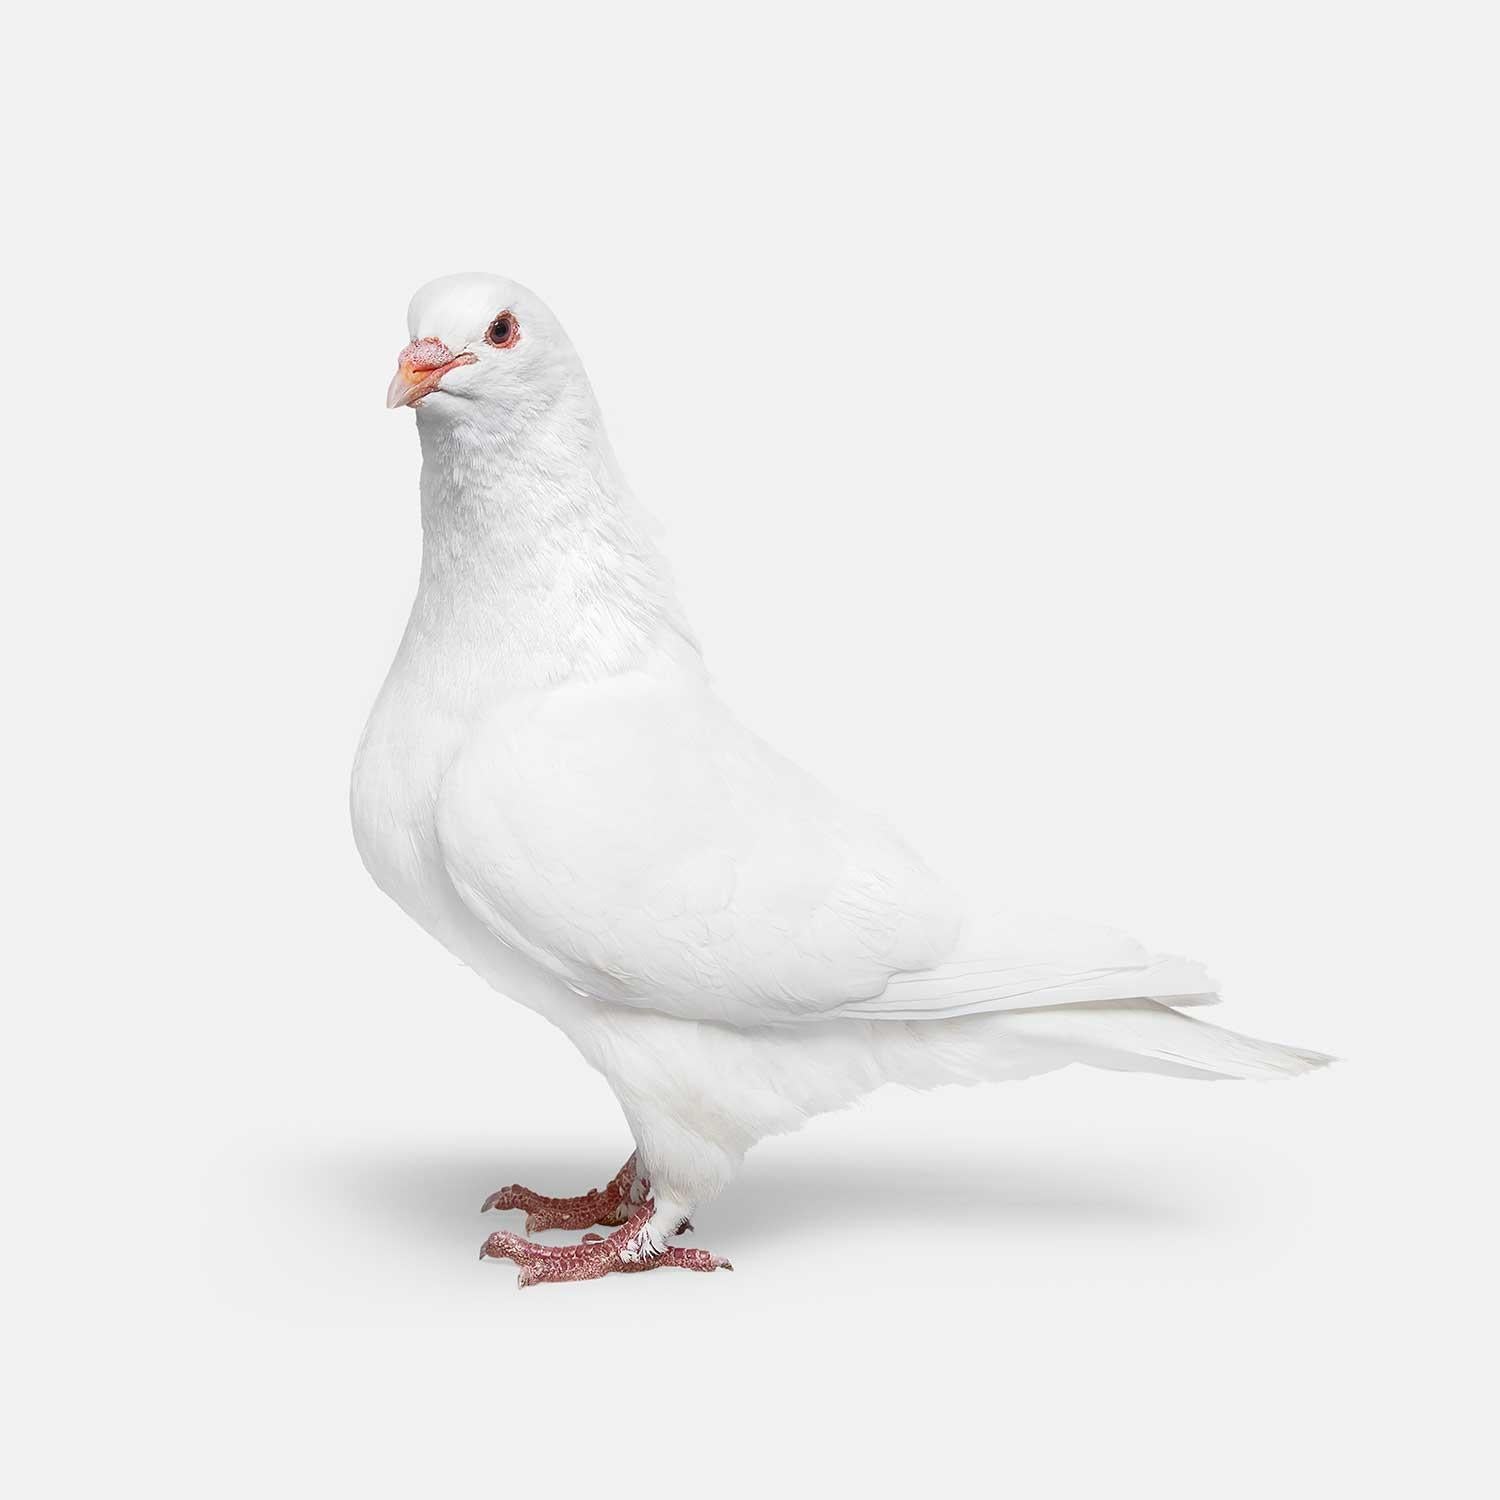 Randal Ford Color Photograph - Pigeon No. 1 (30" x 37.5")